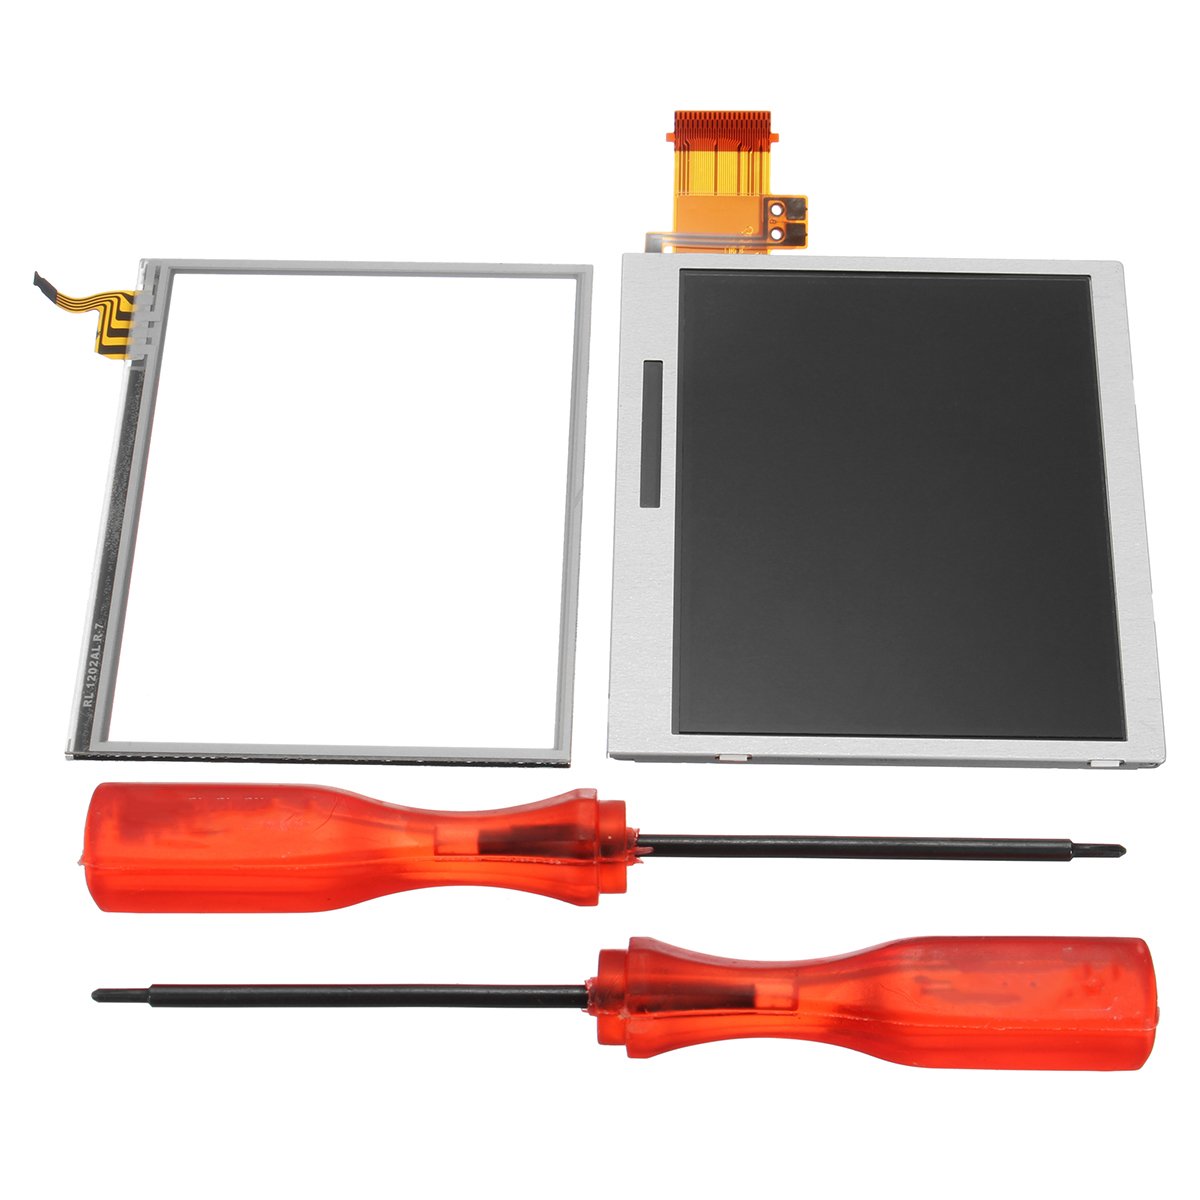 Bottom LCD Display Touch Screen Replacement Tool For Nintendo DS Lite DSL NDSL 1